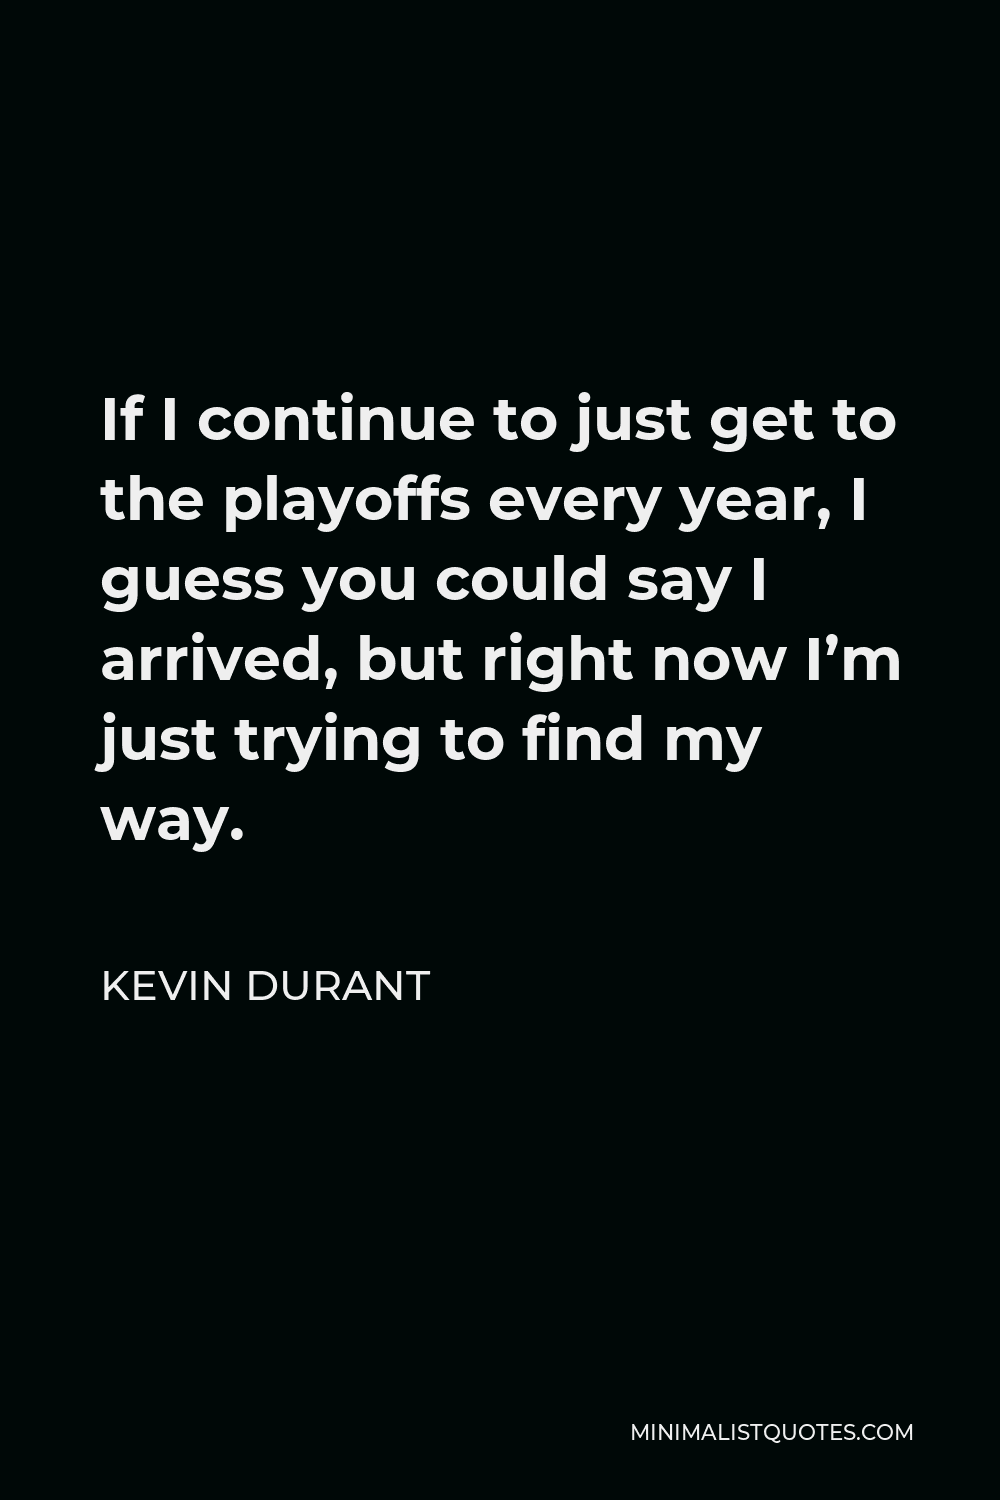 Kevin Durant Quote - If I continue to just get to the playoffs every year, I guess you could say I arrived, but right now I’m just trying to find my way.